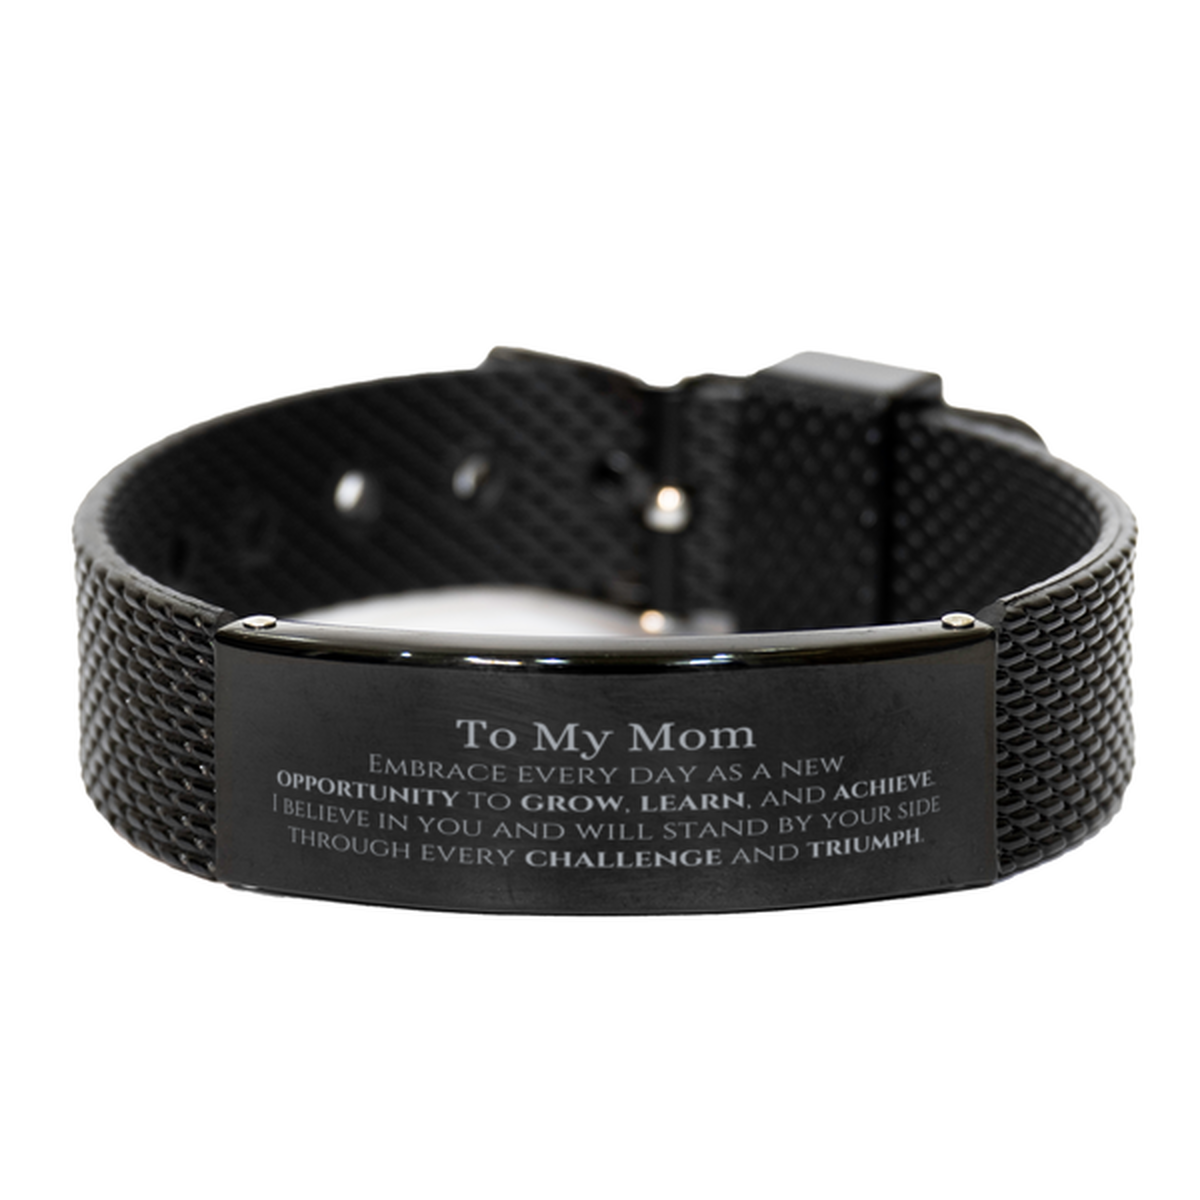 To My Mom Gifts, I believe in you and will stand by your side, Inspirational Black Shark Mesh Bracelet For Mom, Birthday Christmas Motivational Mom Gifts